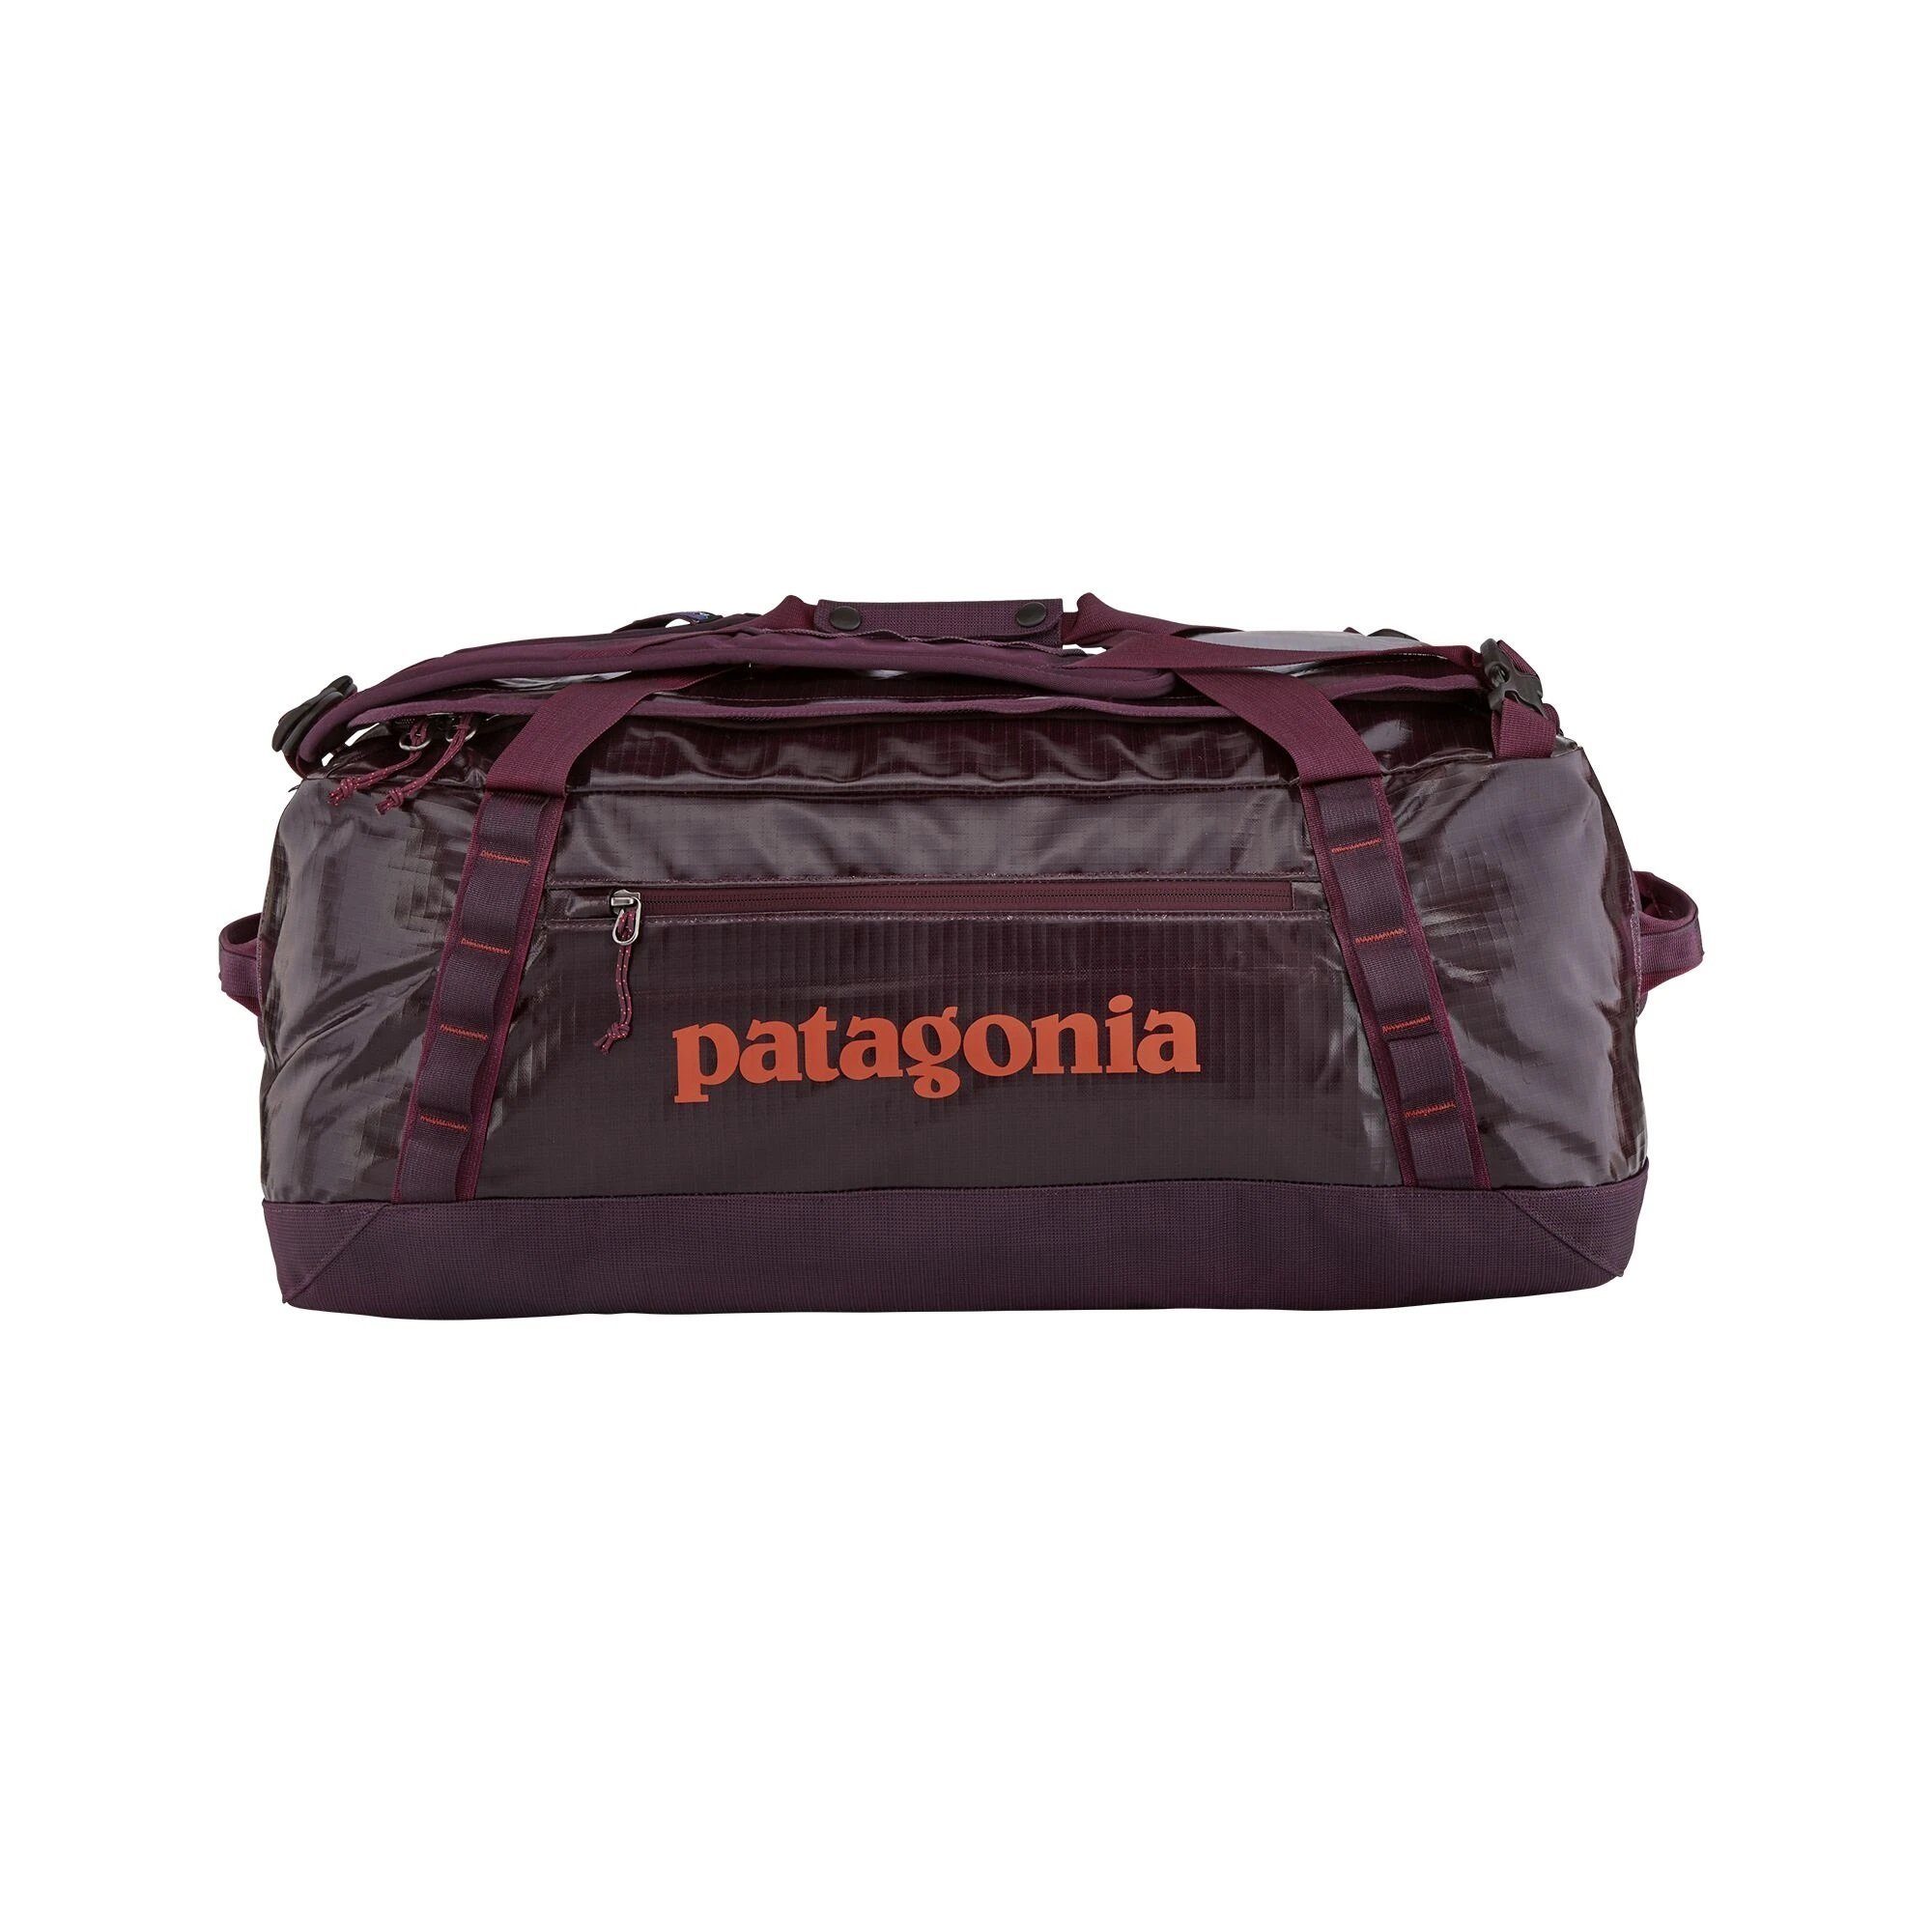 Patagonia Black Hole Duffel Bag 55L - 100 % Recycled Polyester, Deep Plum